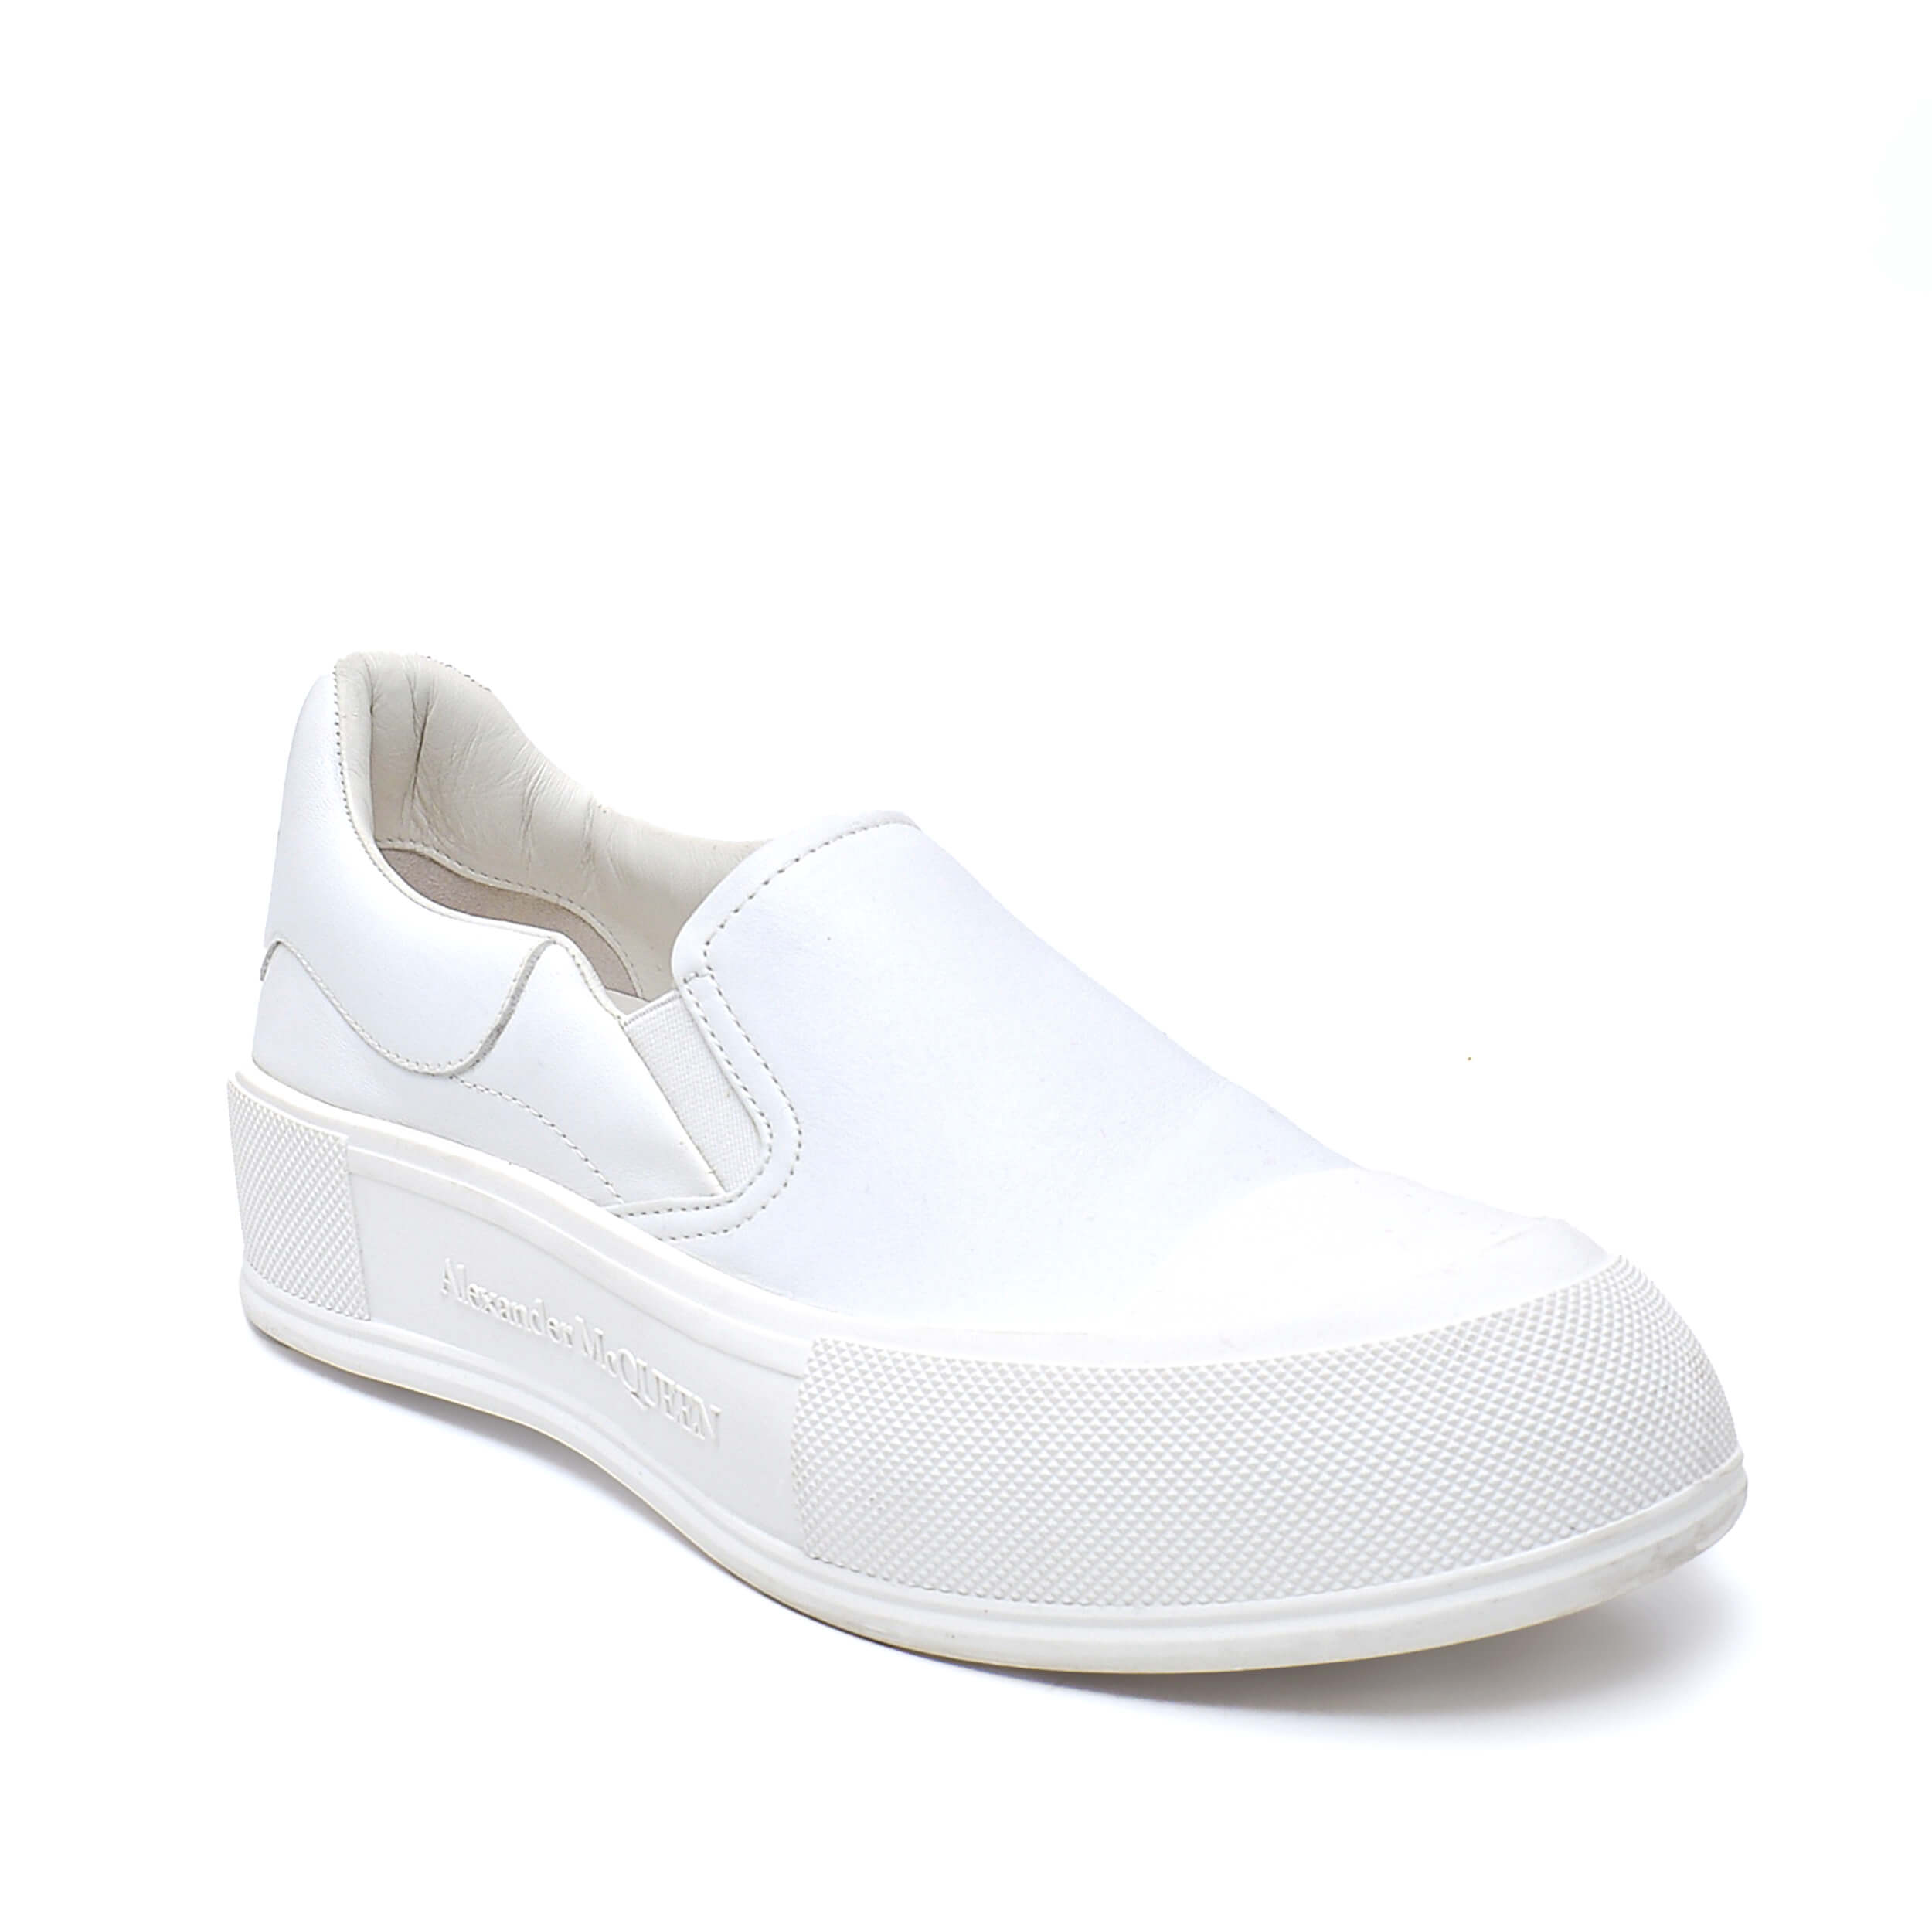 Alexander McQueen - White Leather Loafers / 38